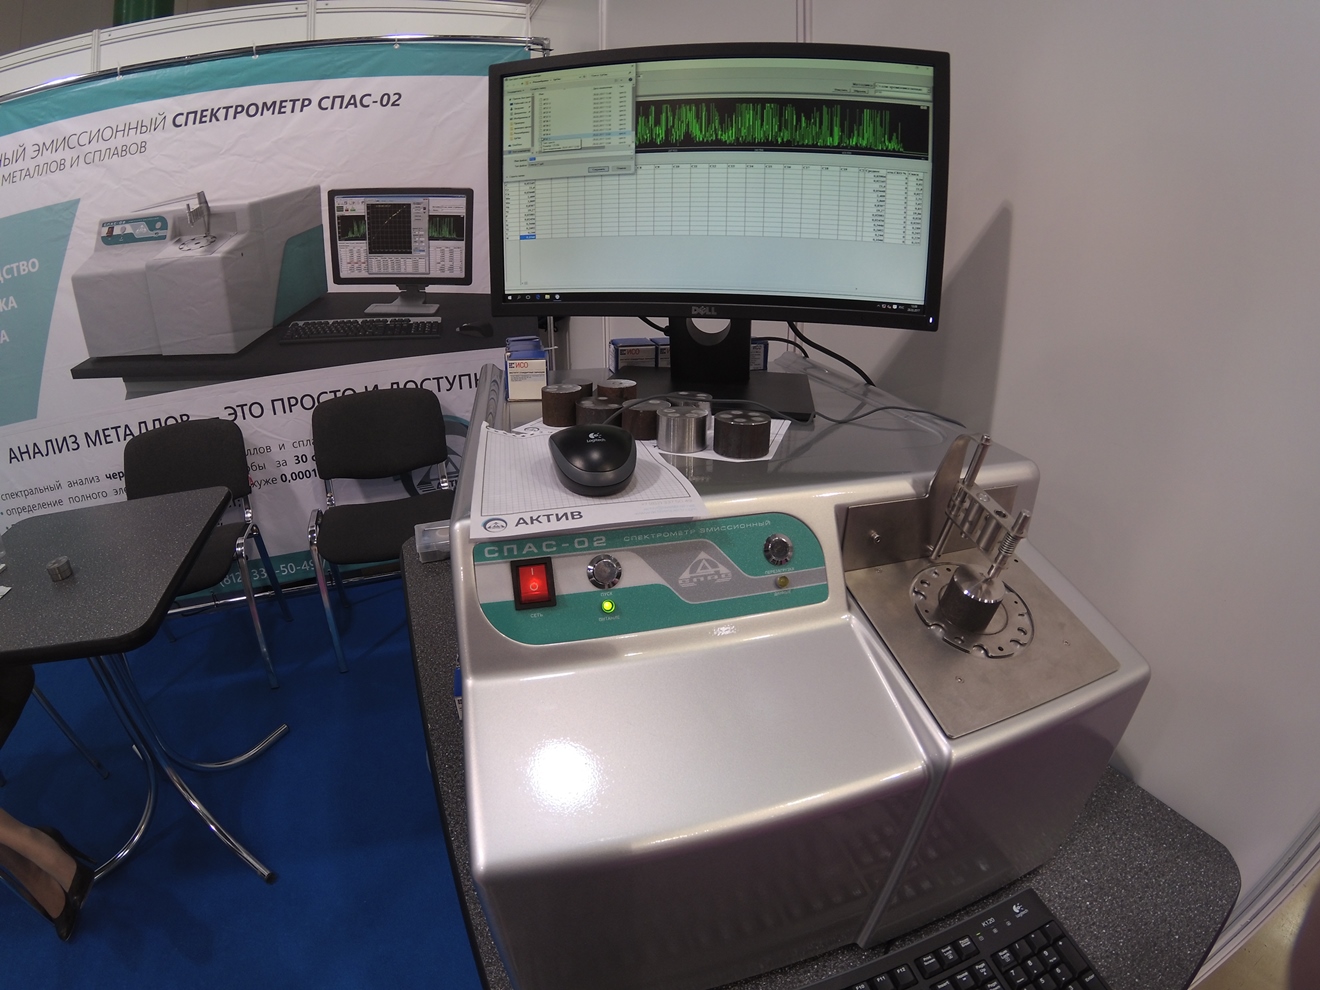 Spectrometer SPAS-02. International exhibition Expo Control 2017 in Moscow.